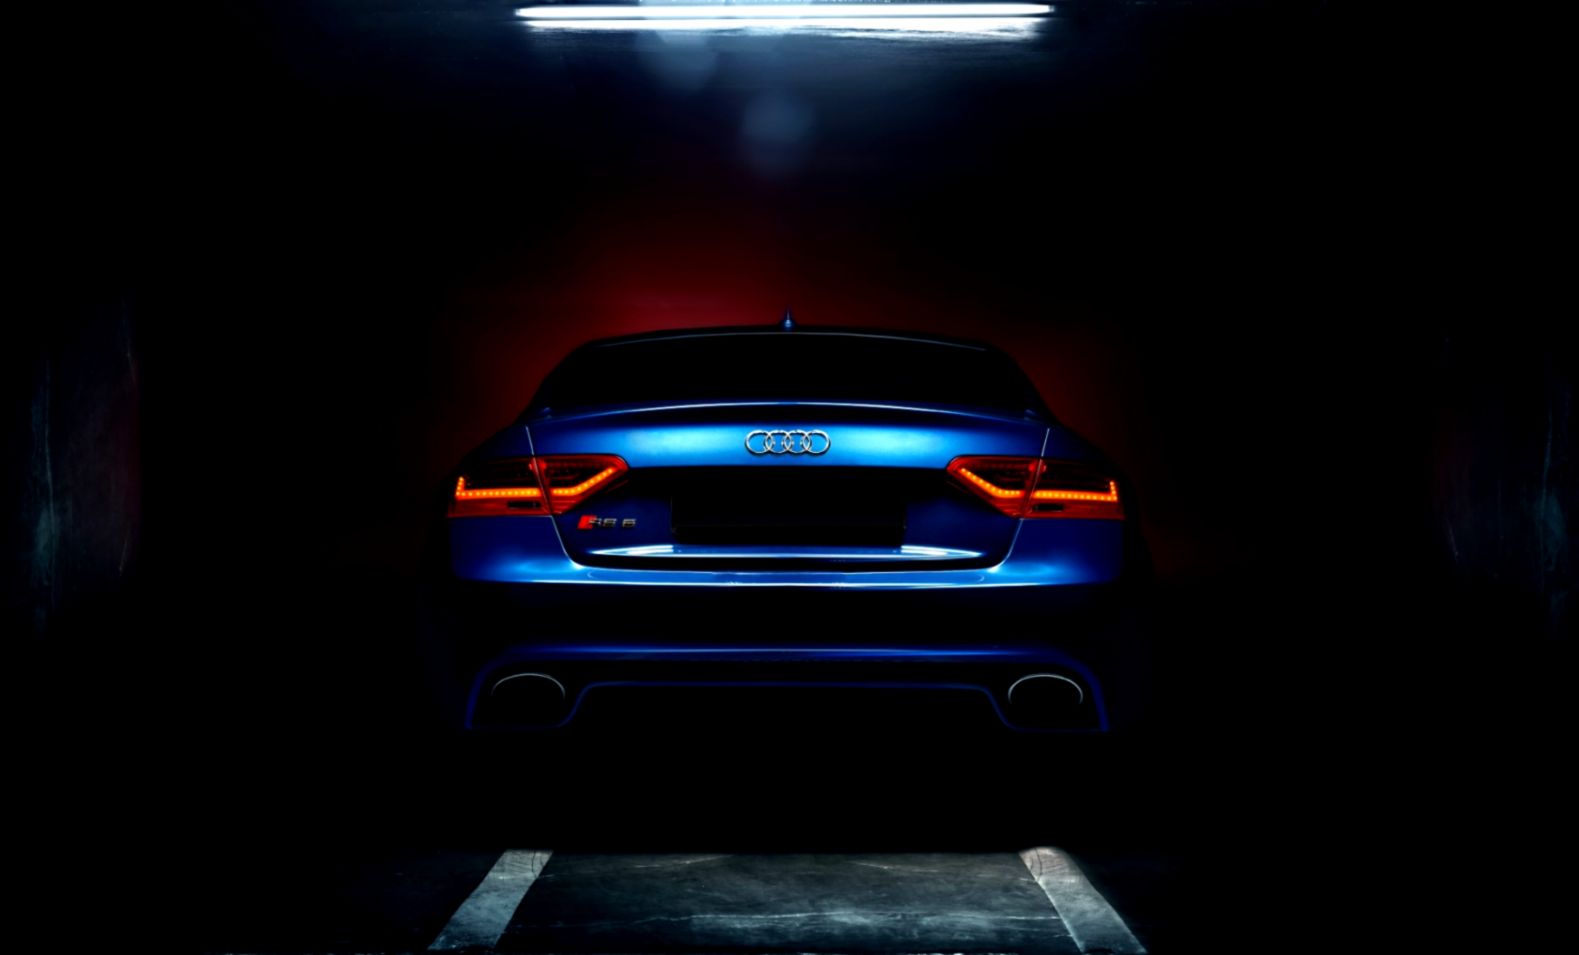 Audi Rs5 Coupe Tuning Blue Car Backlights Glow Hd Wallpaper